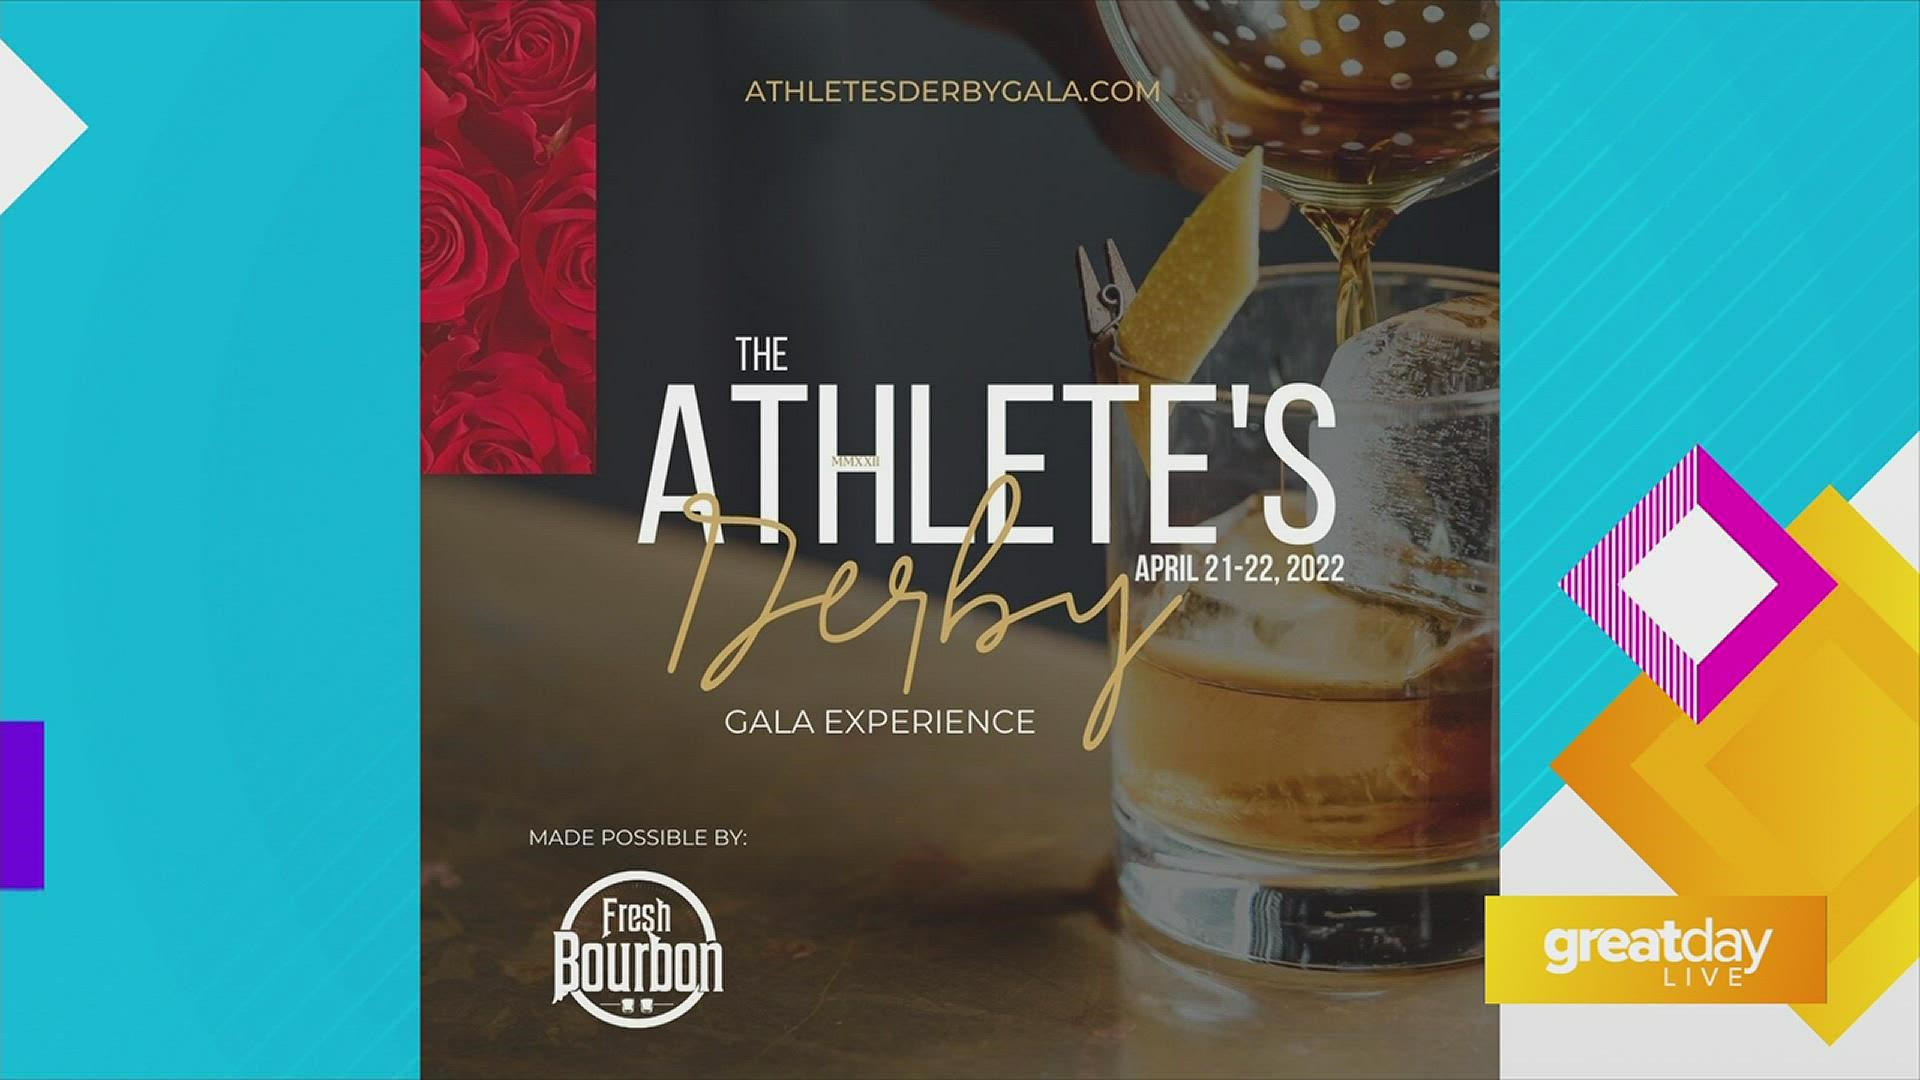 For tickets and more information, visit athletesderbygala.com.